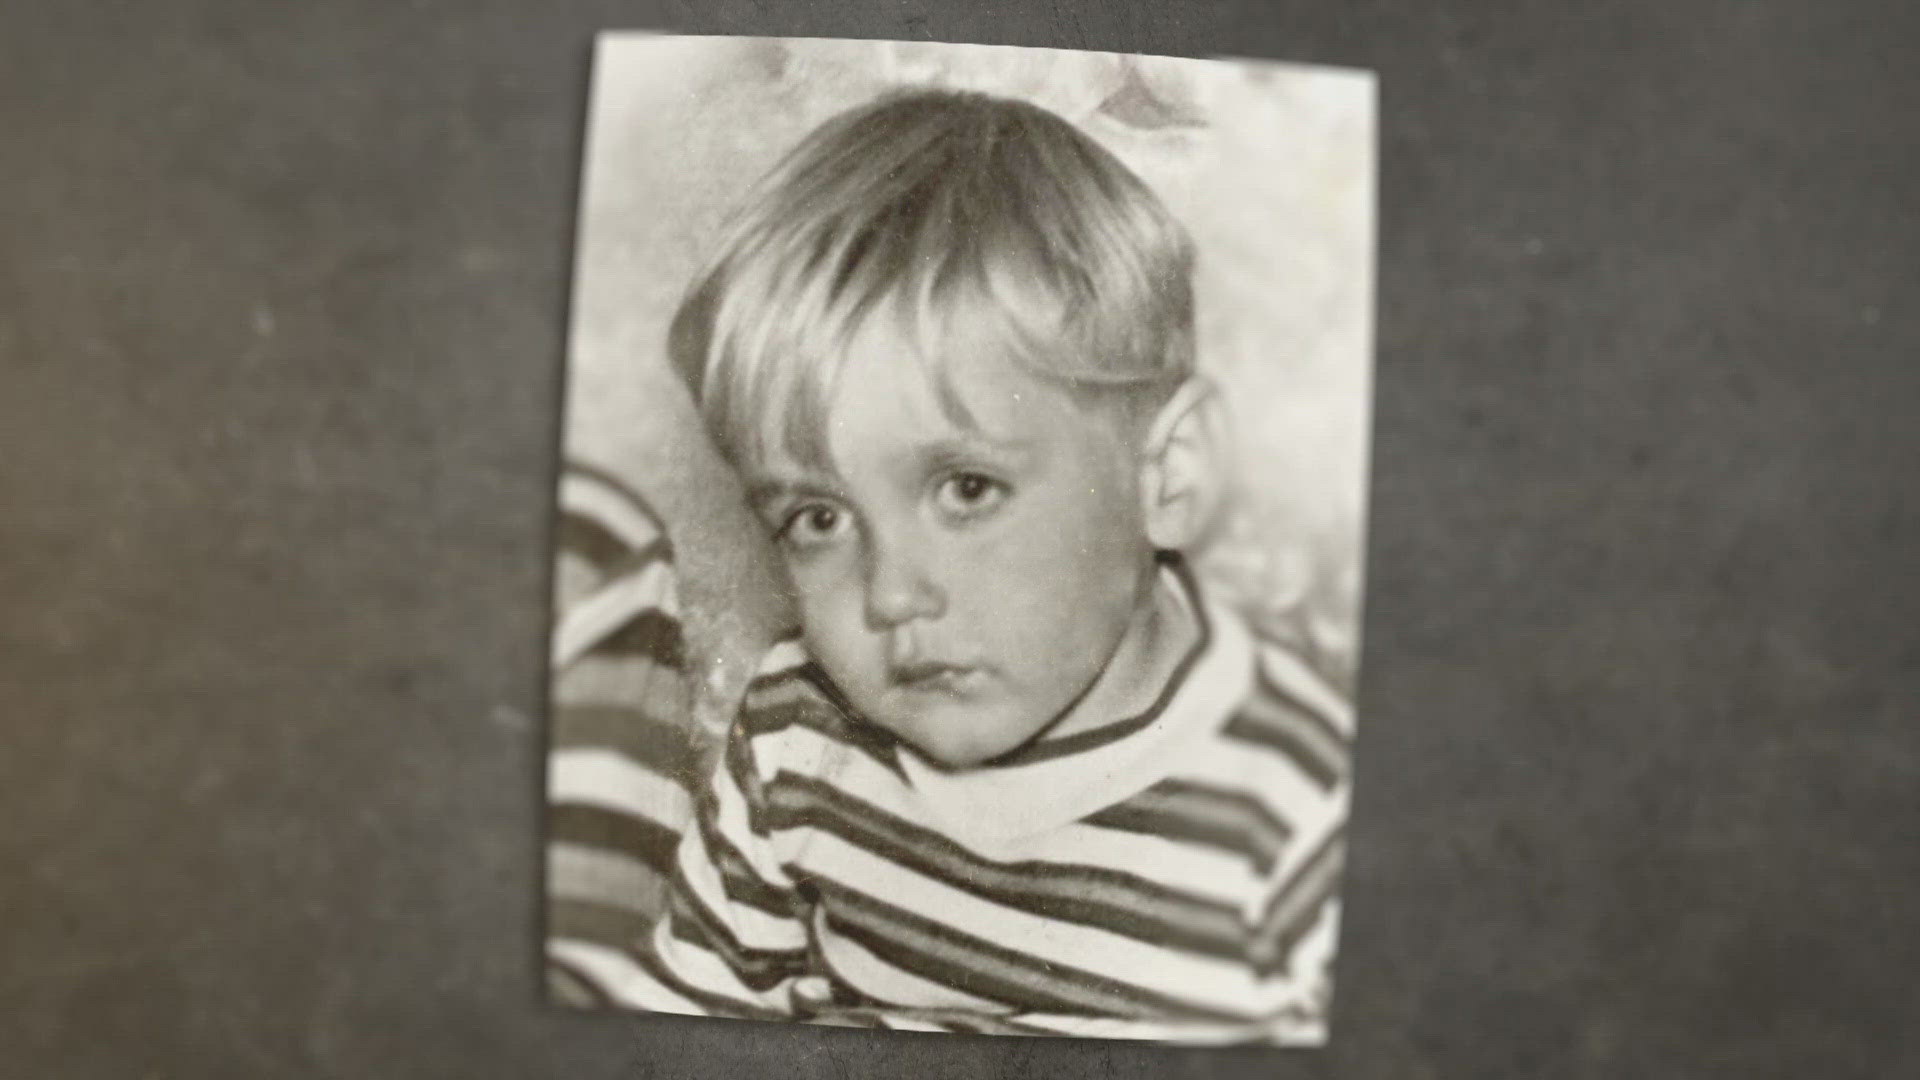 An evening at the beach turned into a nightmare in 1968. The Hagans family has spent decades trying to answer the question: what happened to Jon Jon?